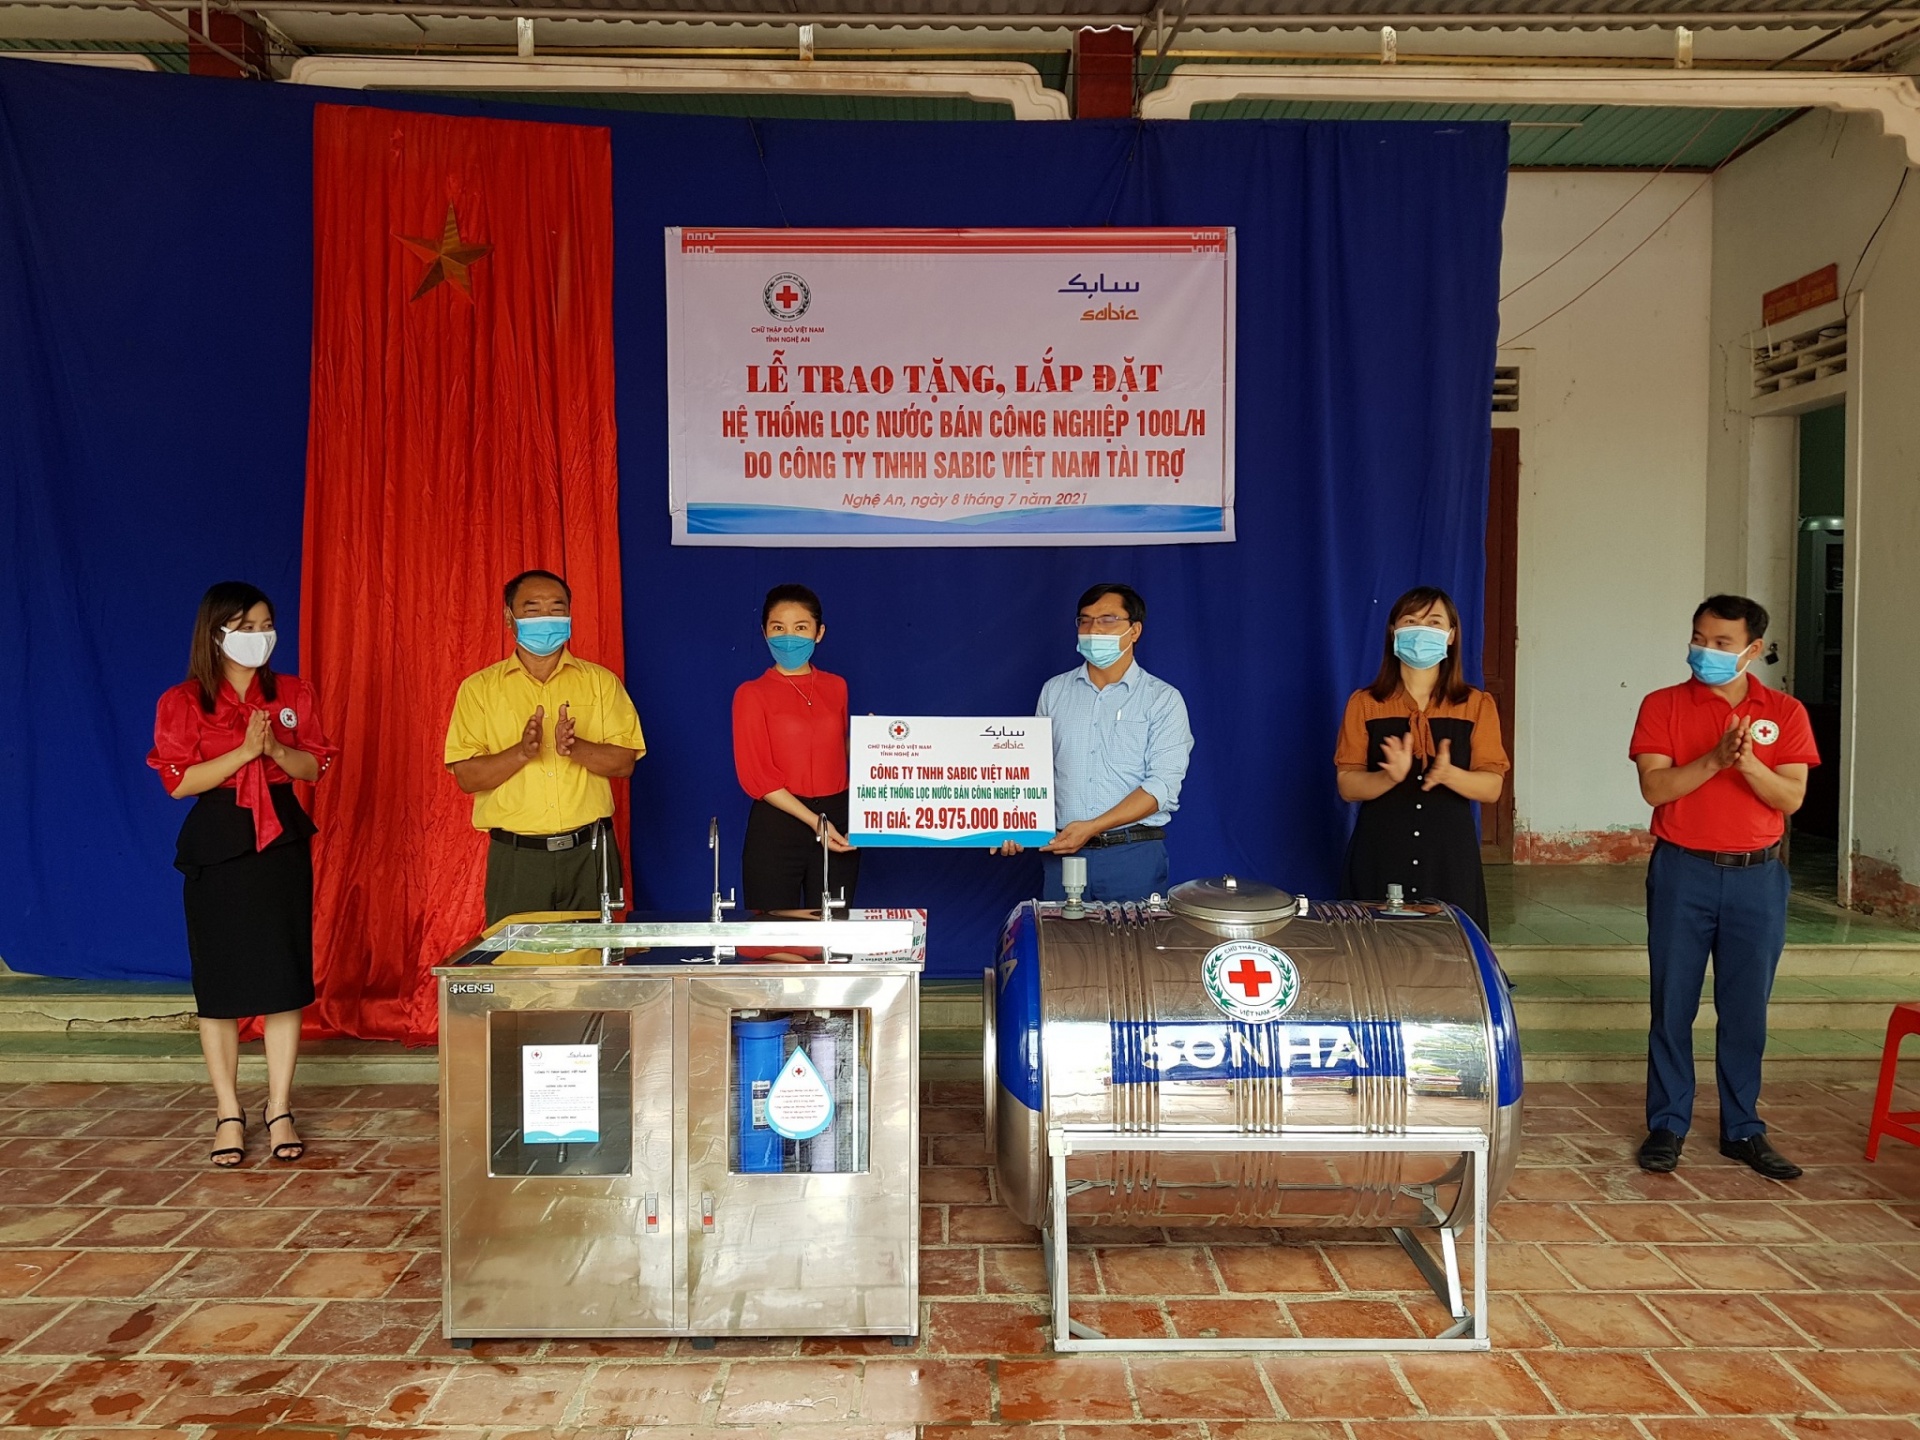 SABIC supports Vietnamese communities with long-term access to safe drinking